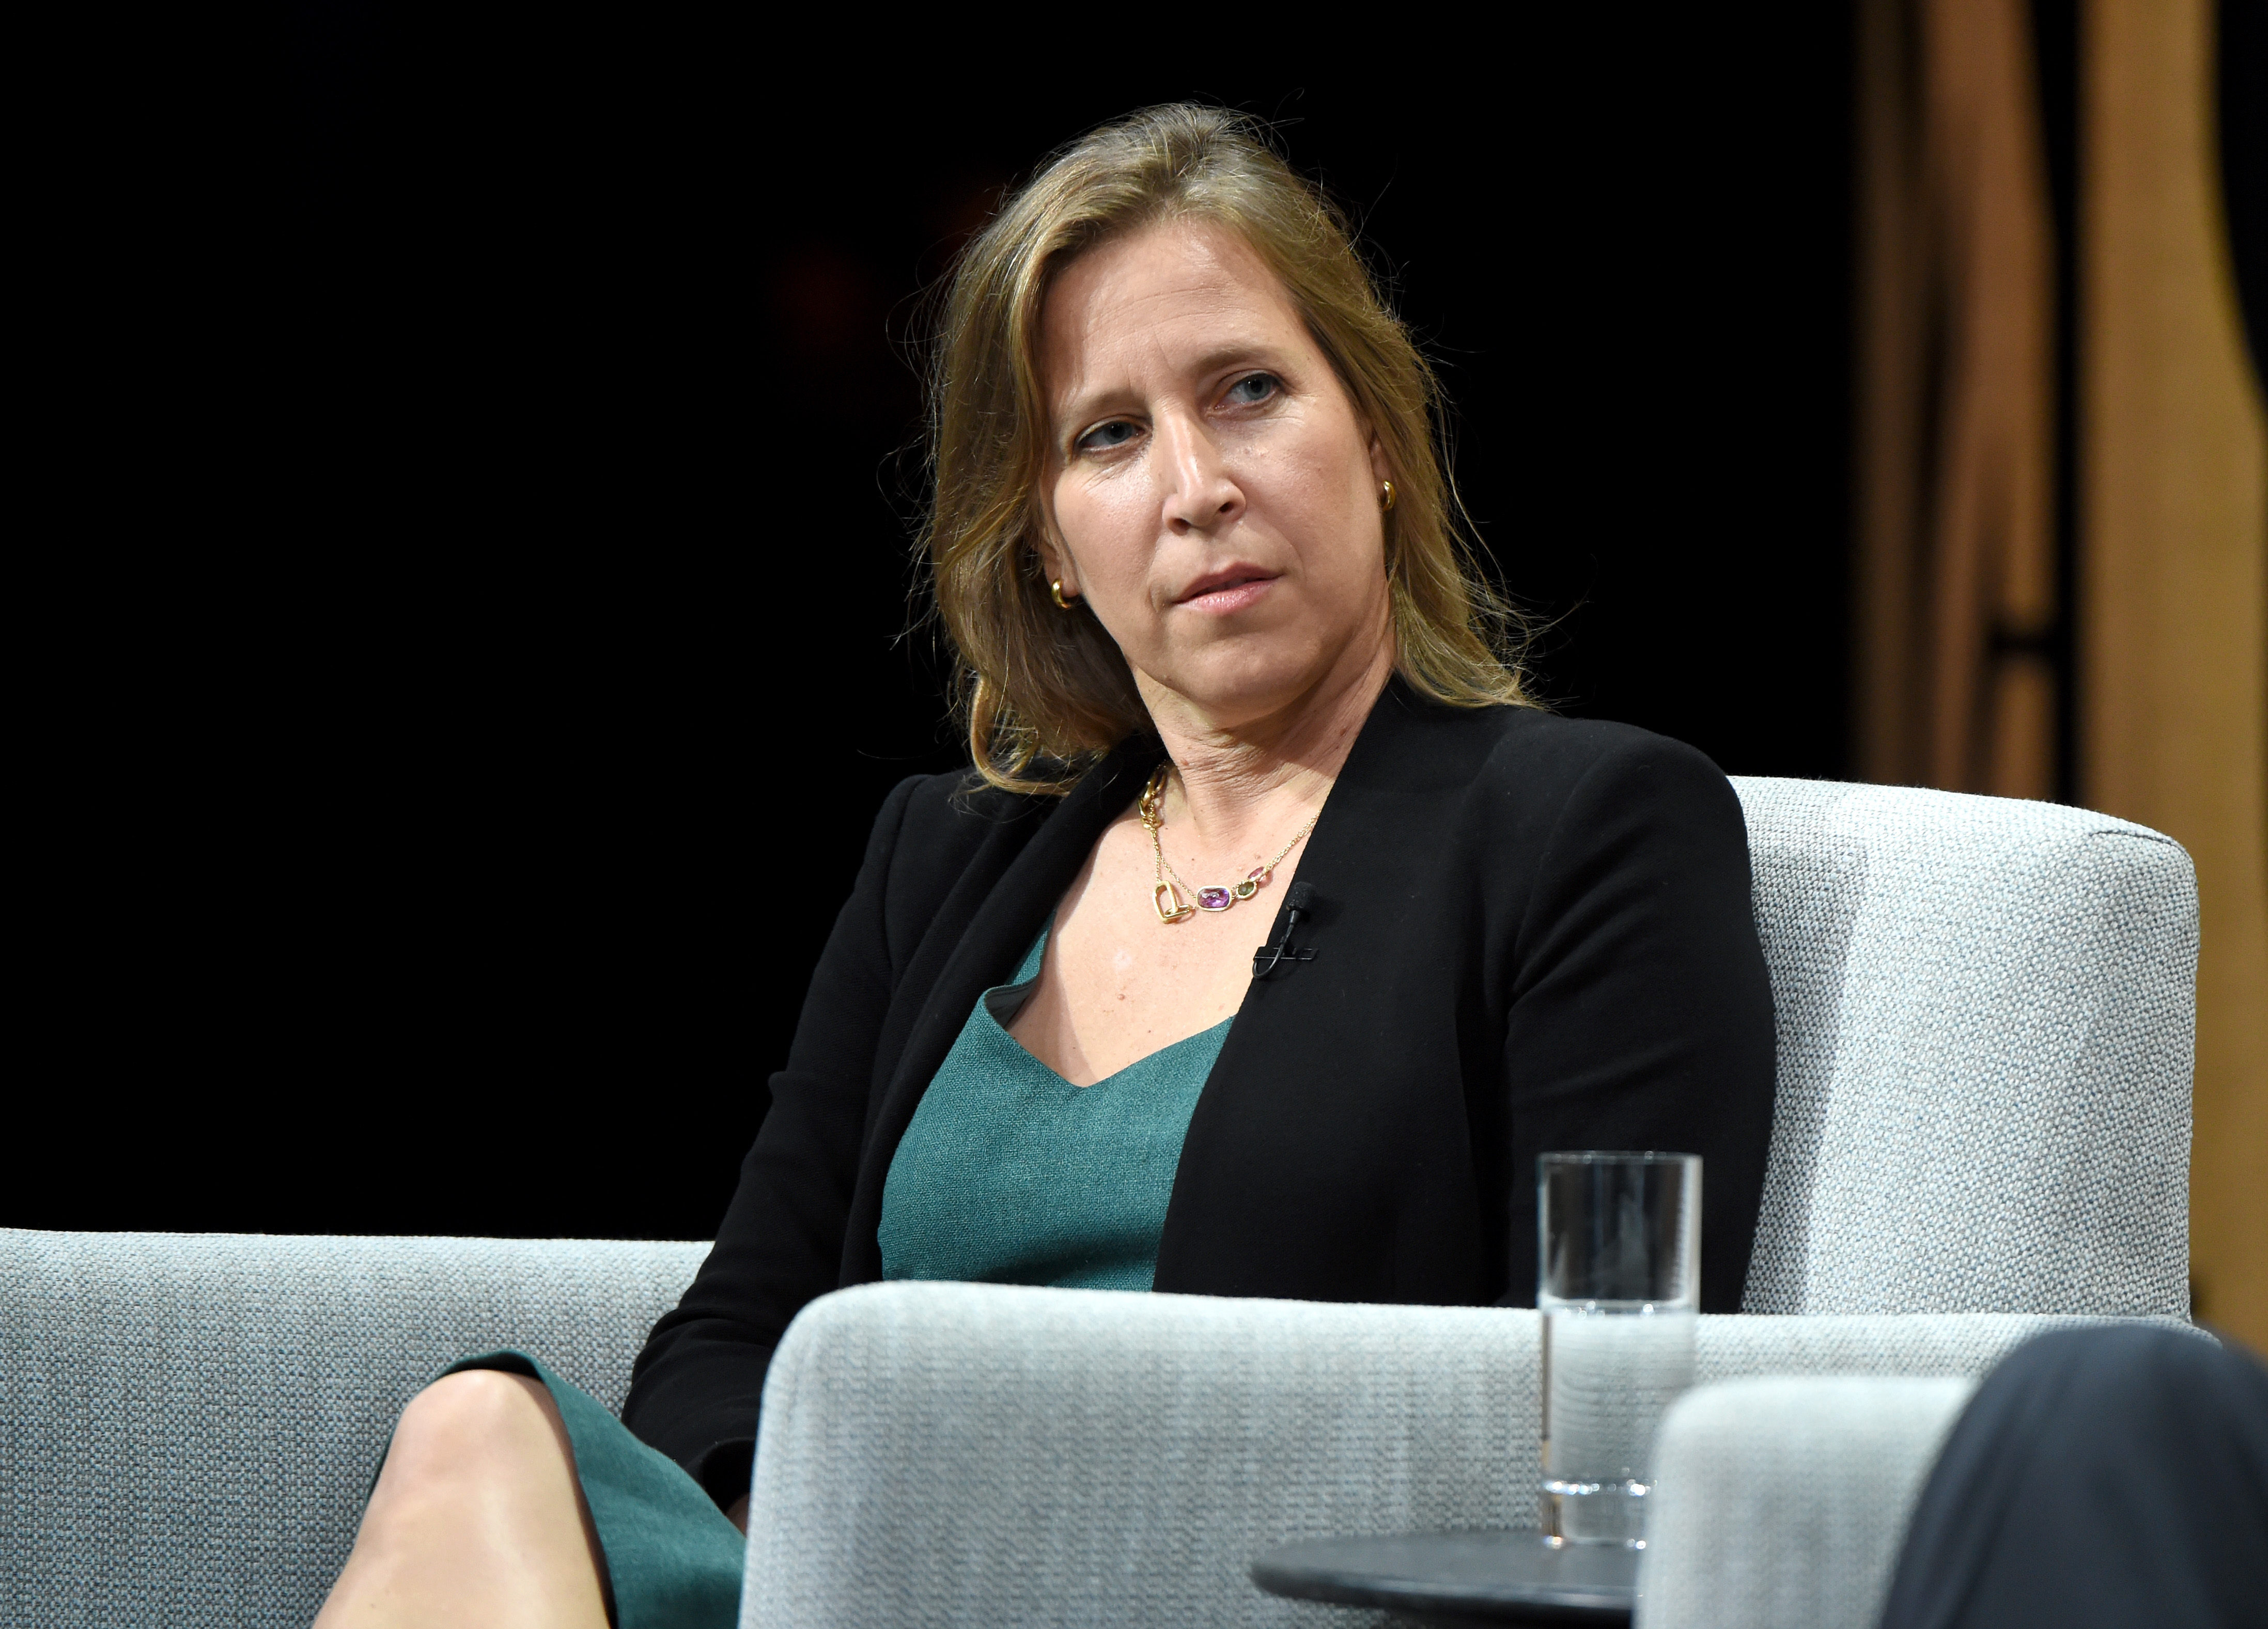 SAN FRANCISCO, CA - OCTOBER 20:  CEO of YouTube, Susan Wojcicki, speaks onstage during "What If the Platform Is the Message? (Or What IfContent Isnt King?)" at the Vanity Fair New Establishment Summit at Yerba Buena Center for the Arts on October 20, 2016 in San Francisco, California.  (Photo by Michael Kovac/Getty Images for Vanity Fair) (Michael Kovac&mdash;Getty Images for Vanity Fair)